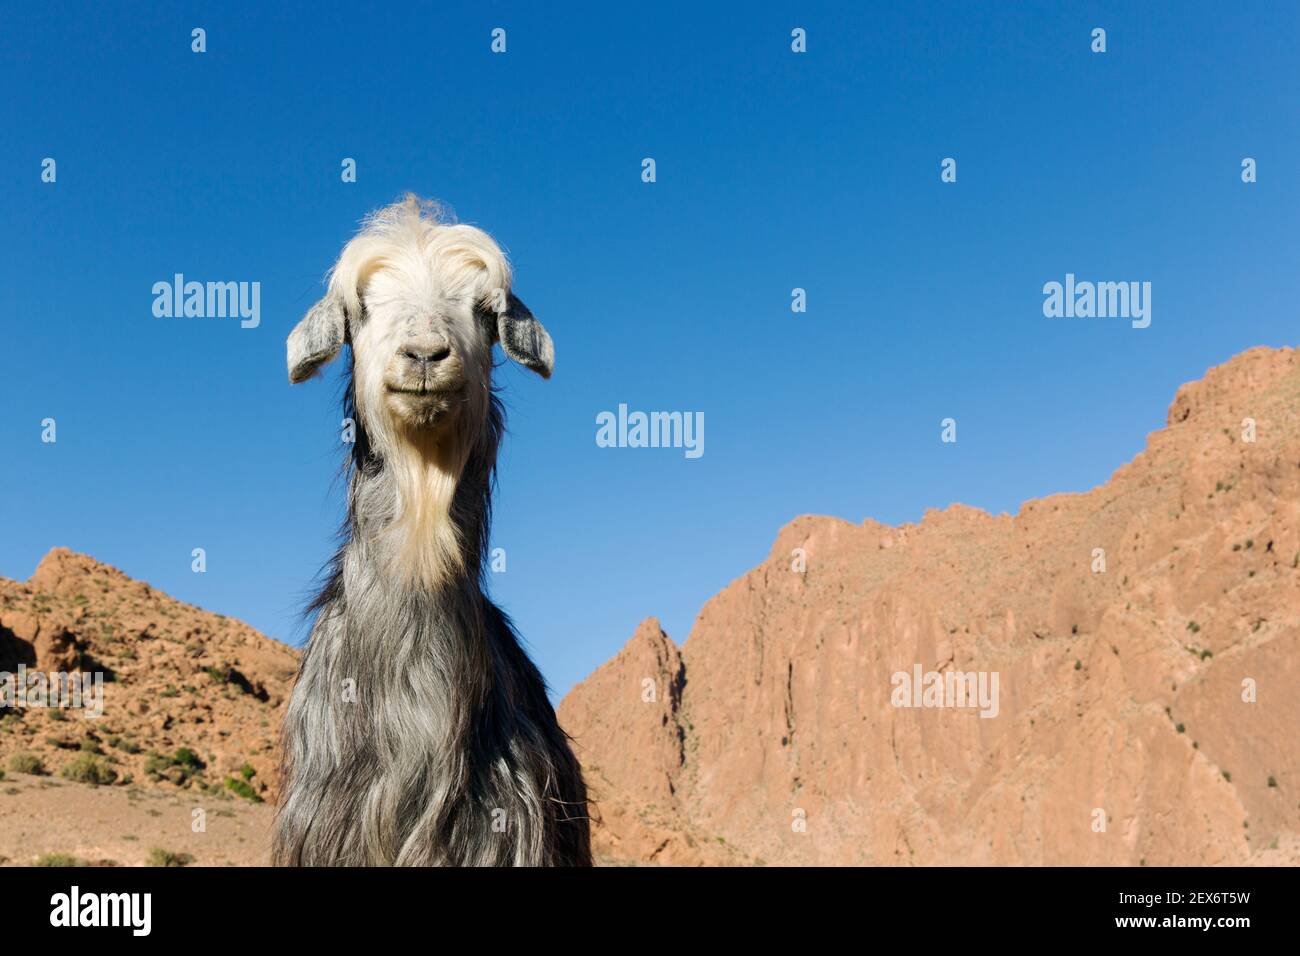 Morocco, Dades Valley, goat against a blue sky Stock Photo